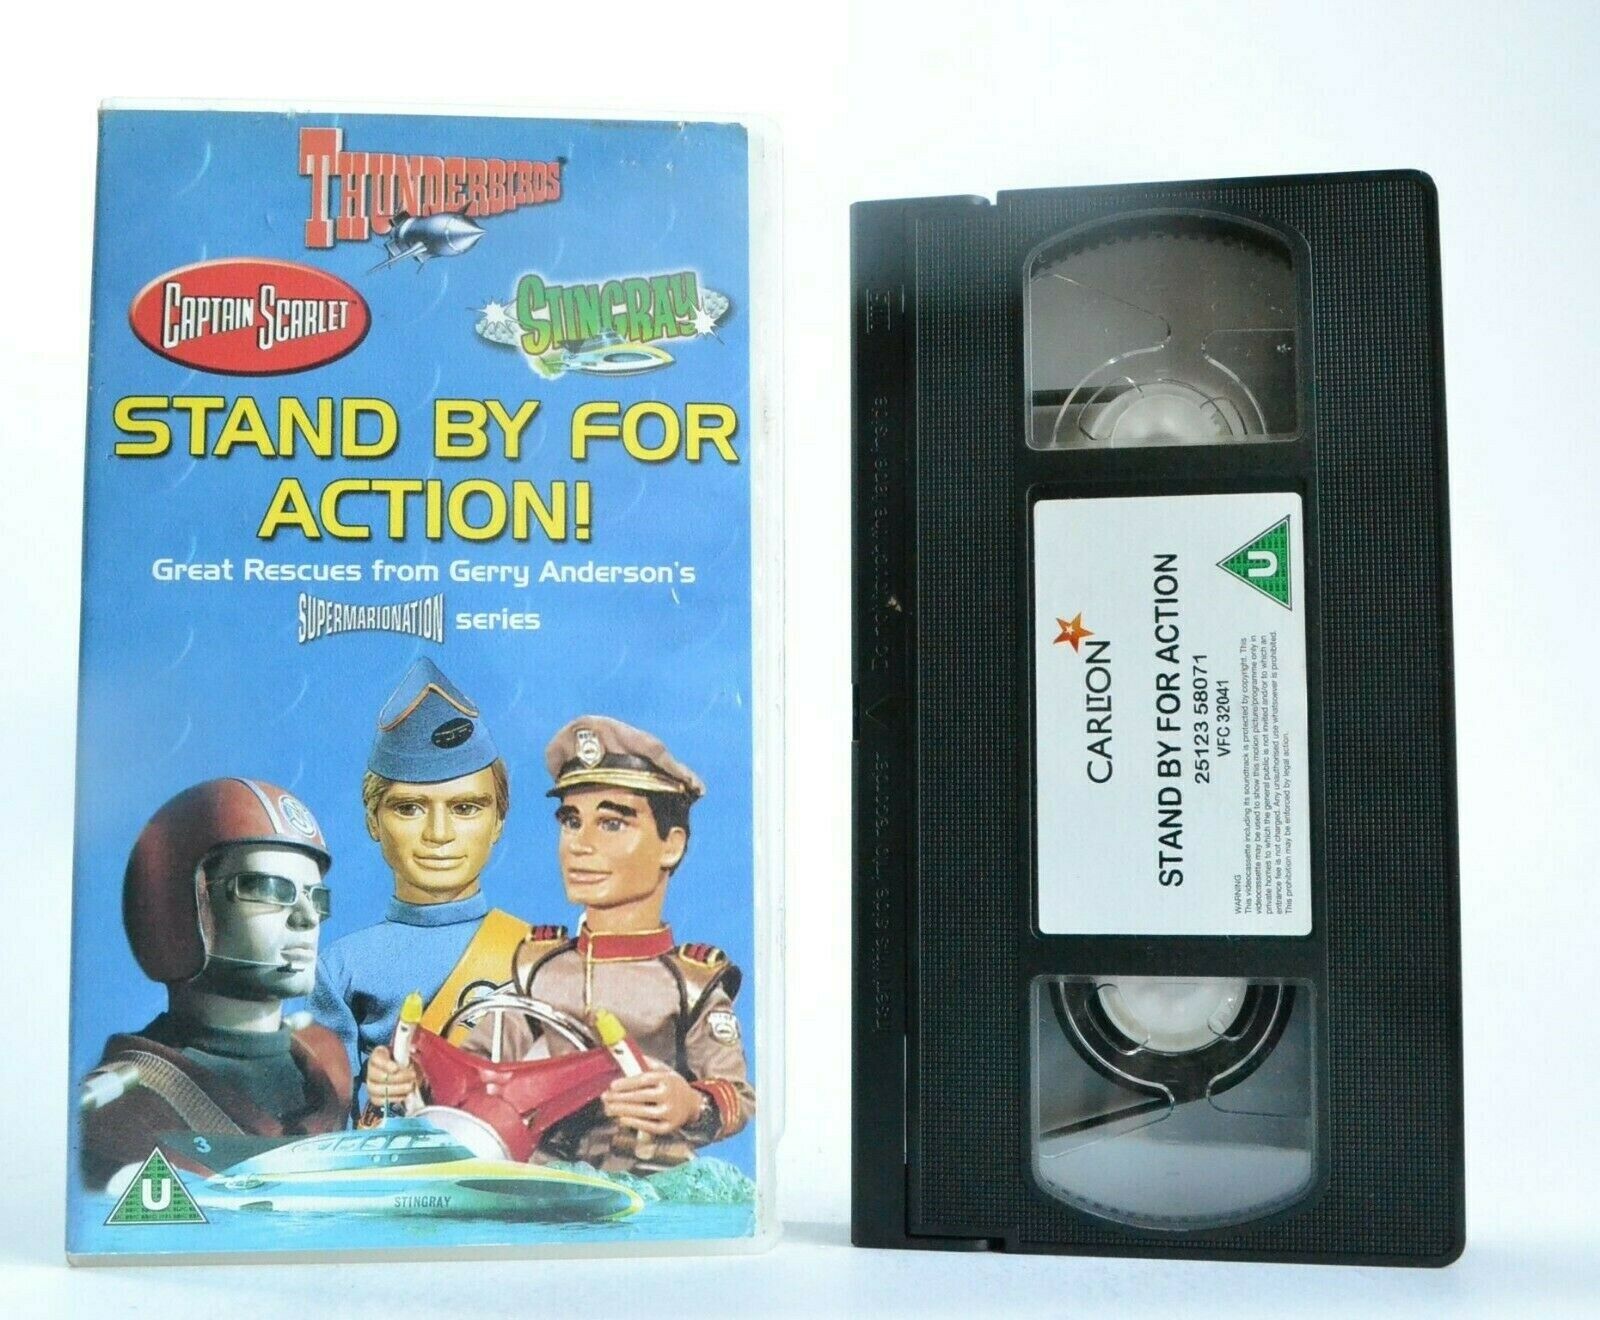 Stand By For Action (Carlton): Thunderbirds - Captain Scarlet - Stingray - VHS-